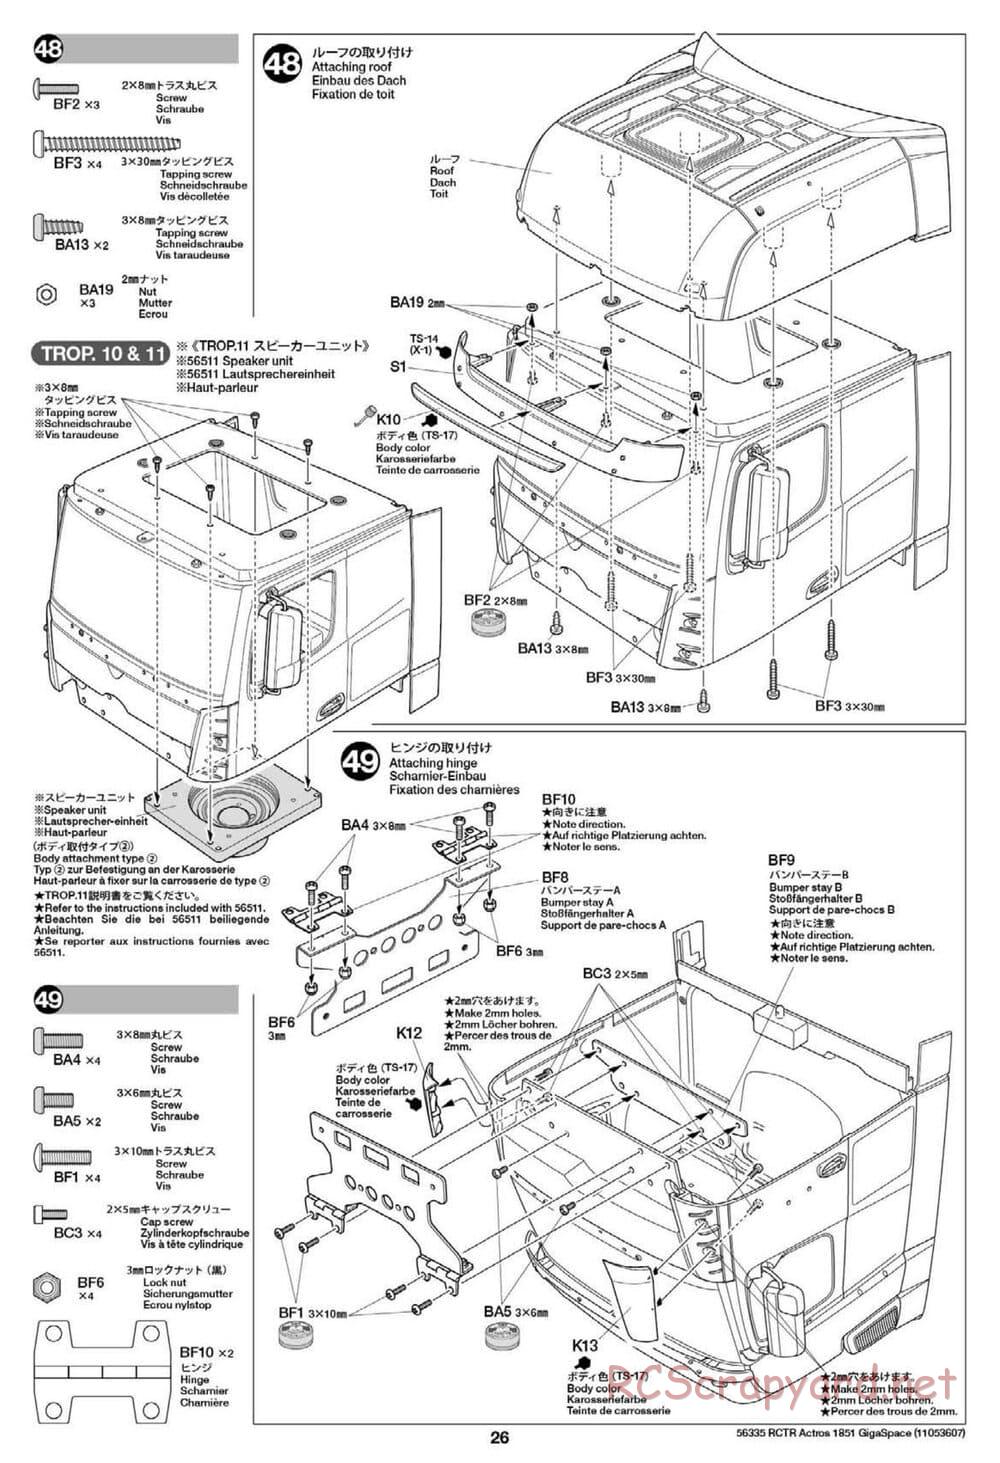 Tamiya - Mercedes-Benz Actros 1851 Gigaspace Tractor Truck Chassis - Manual - Page 26